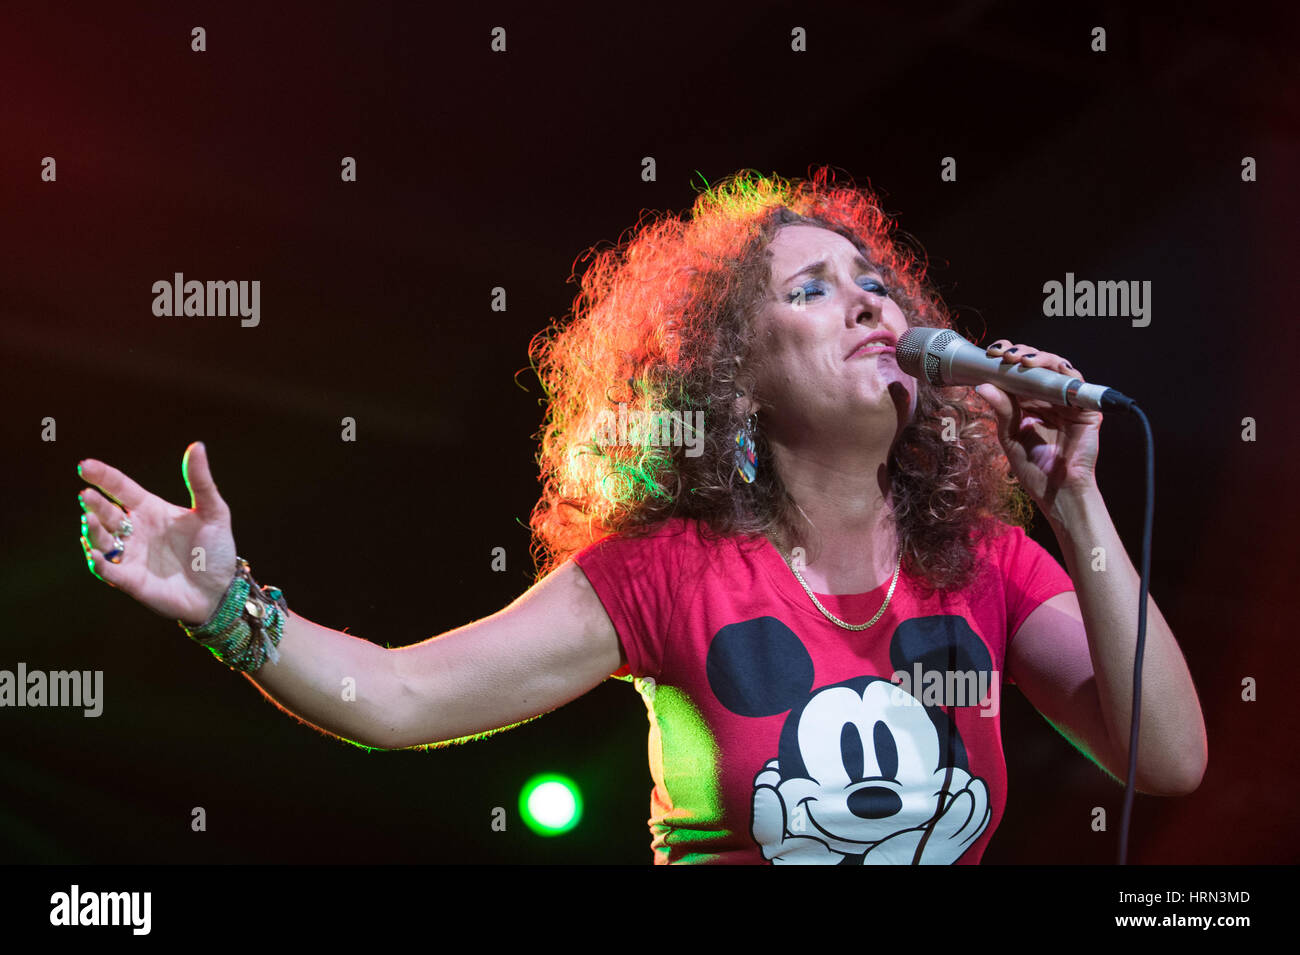 Jakarta, Indonesia. 3rd Mar, 2017. Singer Beate S. Lech performs during the Jakarta International BNI Java Jazz Festival 2017 in Jakarta, Indonesia, March 3, 2017. The Jakarta International BNI Java Jazz Festival is held from March 3 to 5. Credit: Du Yu/Xinhua/Alamy Live News Stock Photo